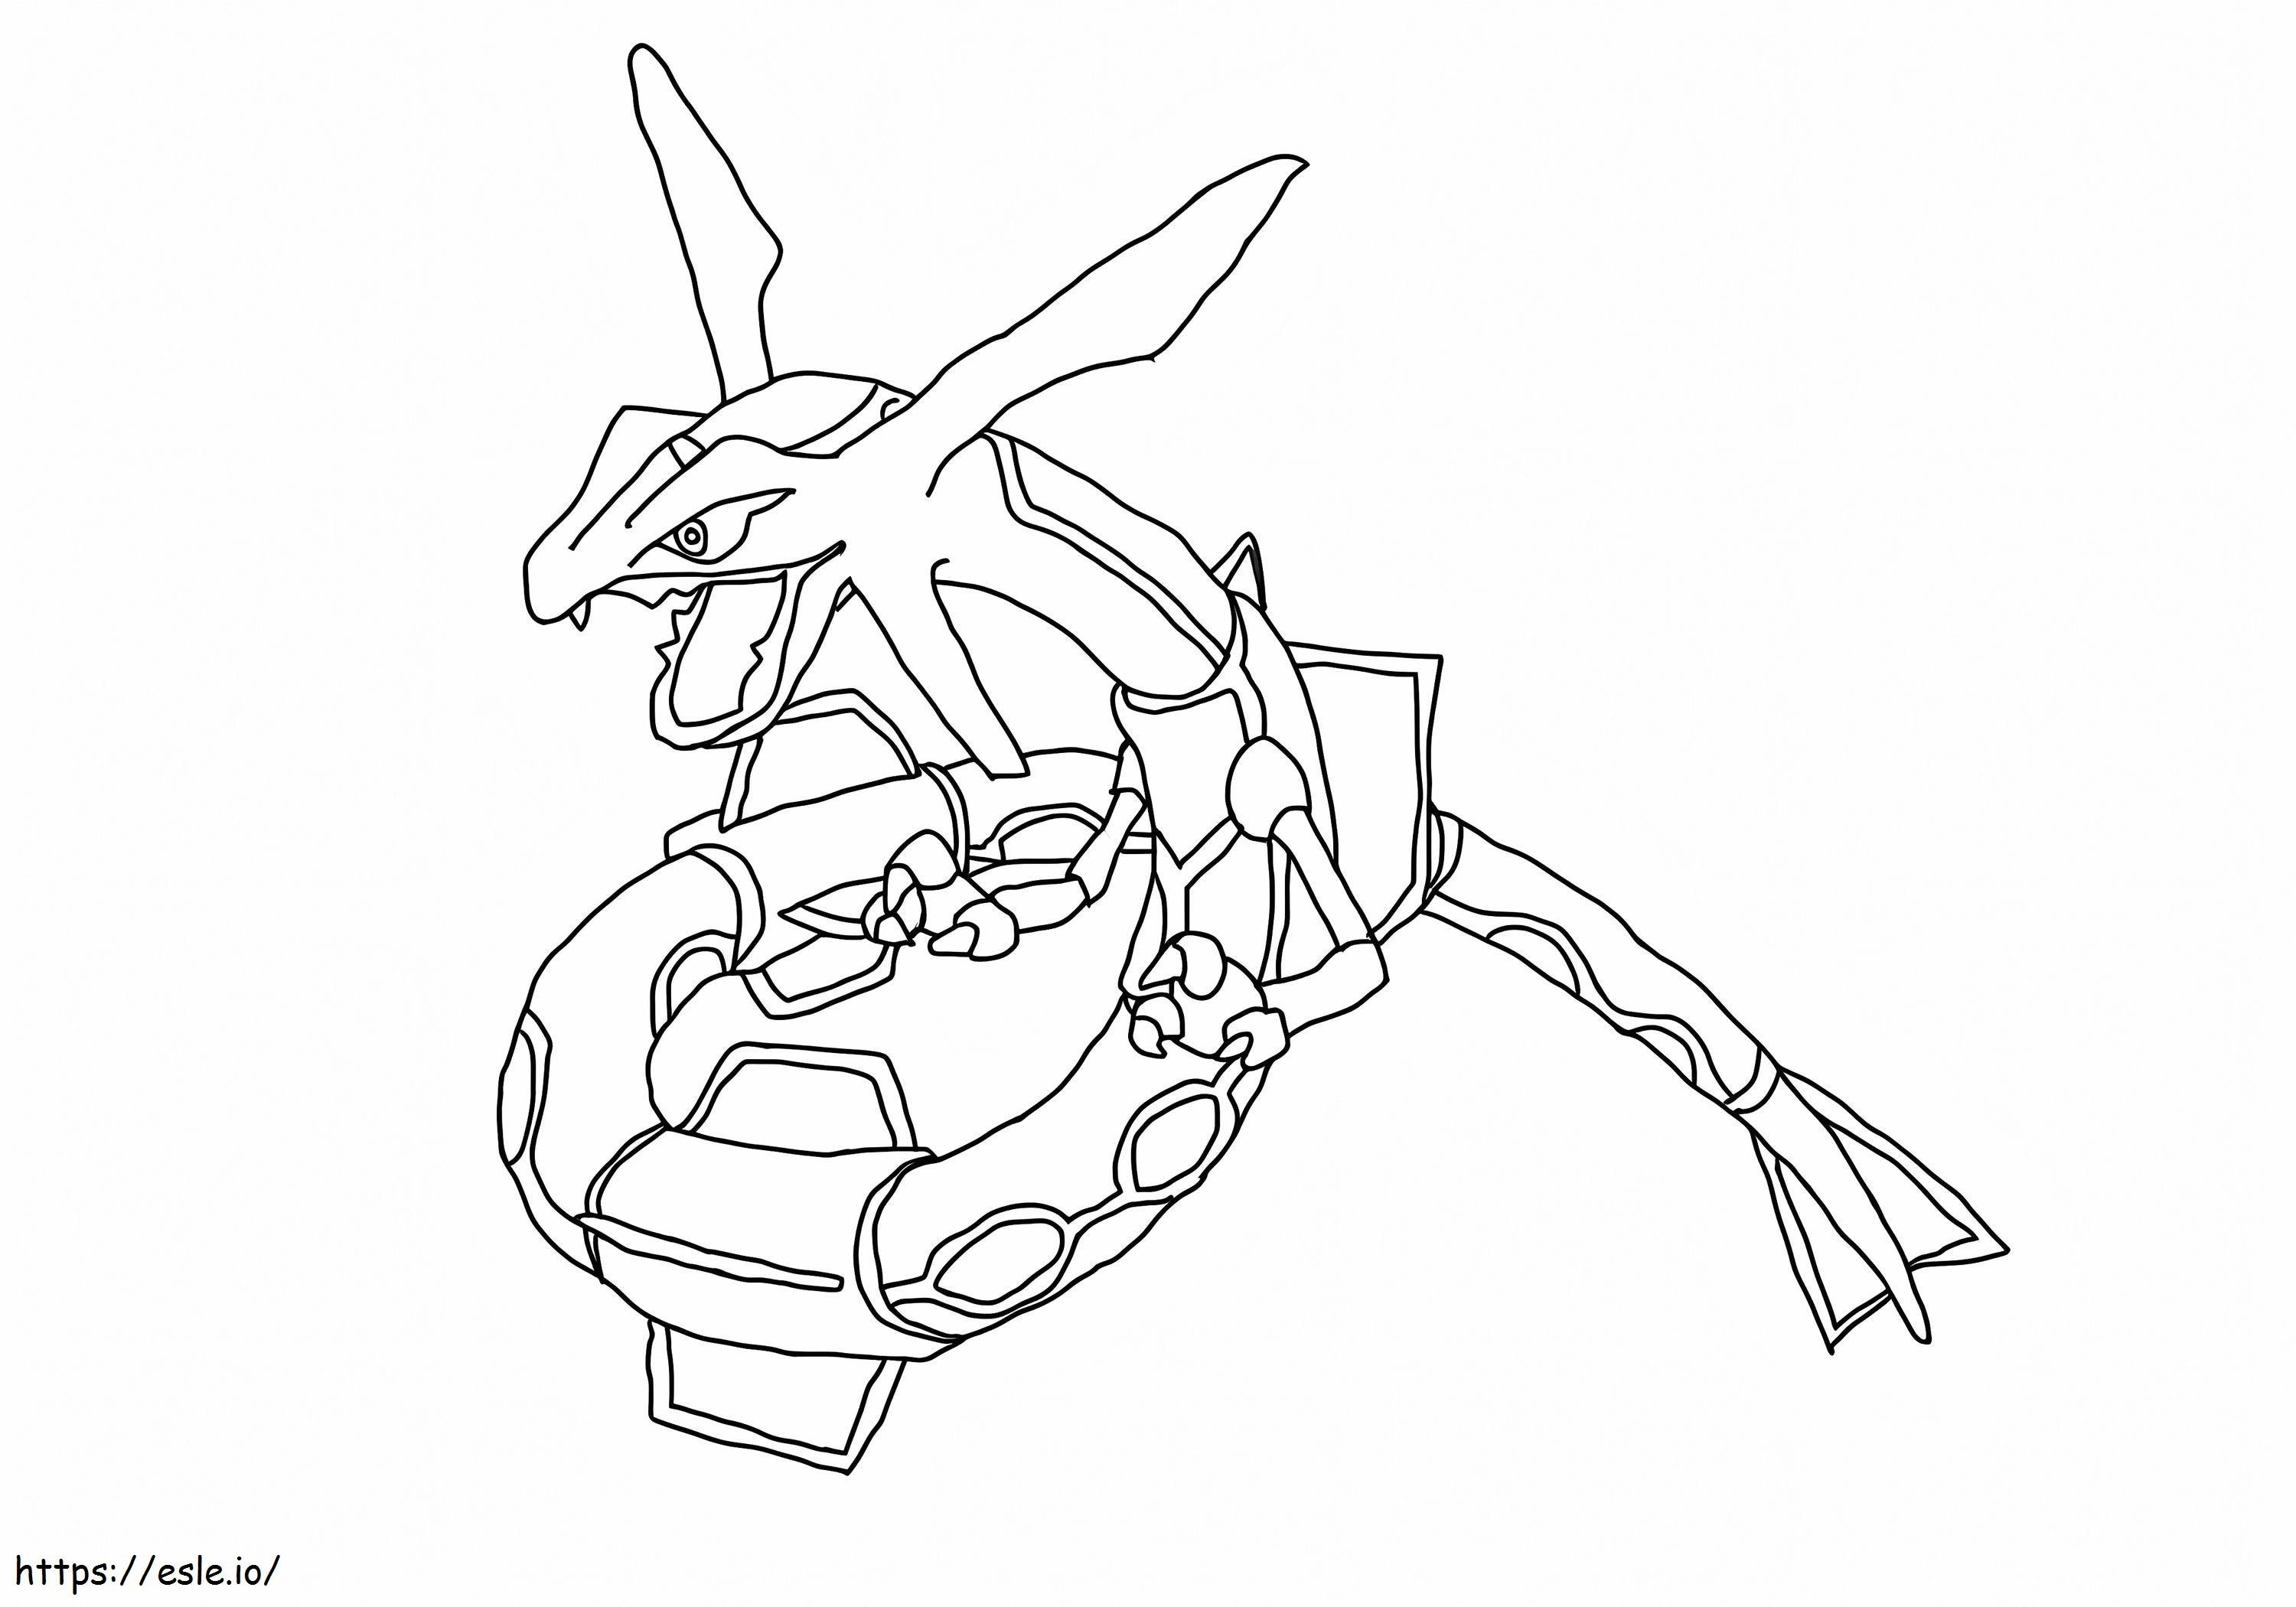 Rayquaza coloring page